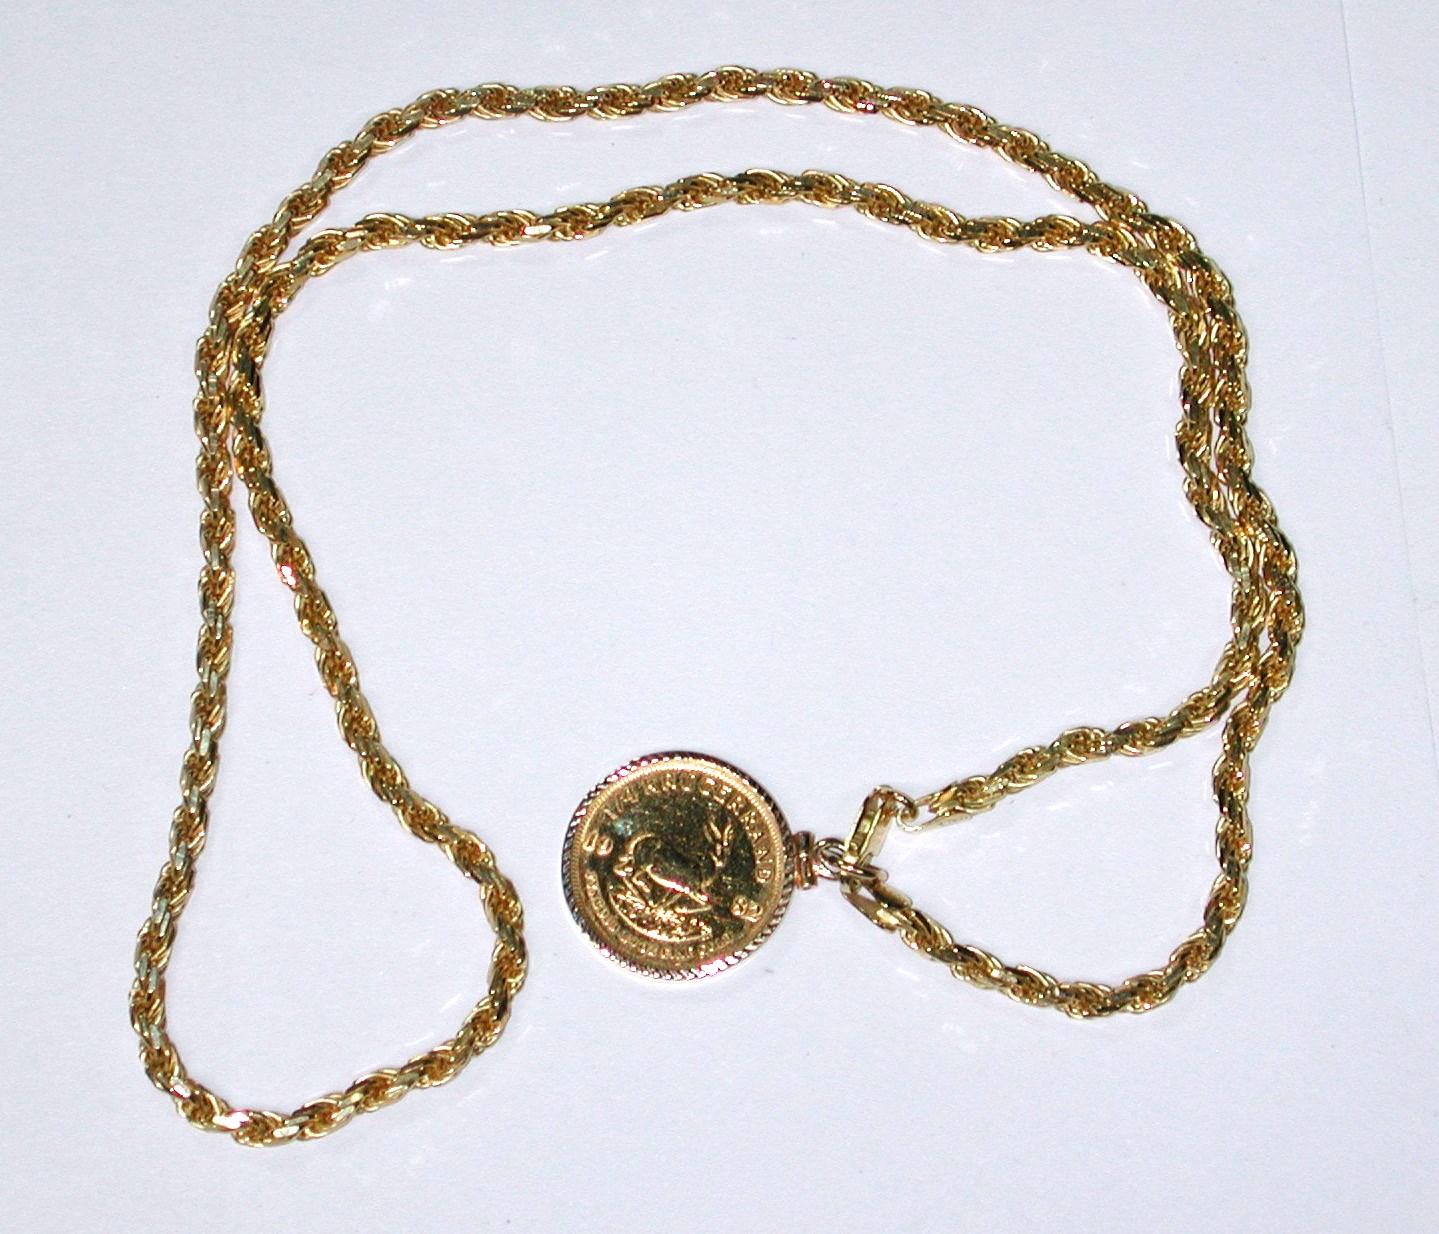 1982 1/4 OZ GOLD KRUGERRAND on 23" HEAVY GOLD PLATED STERLING SILVER CHAIN